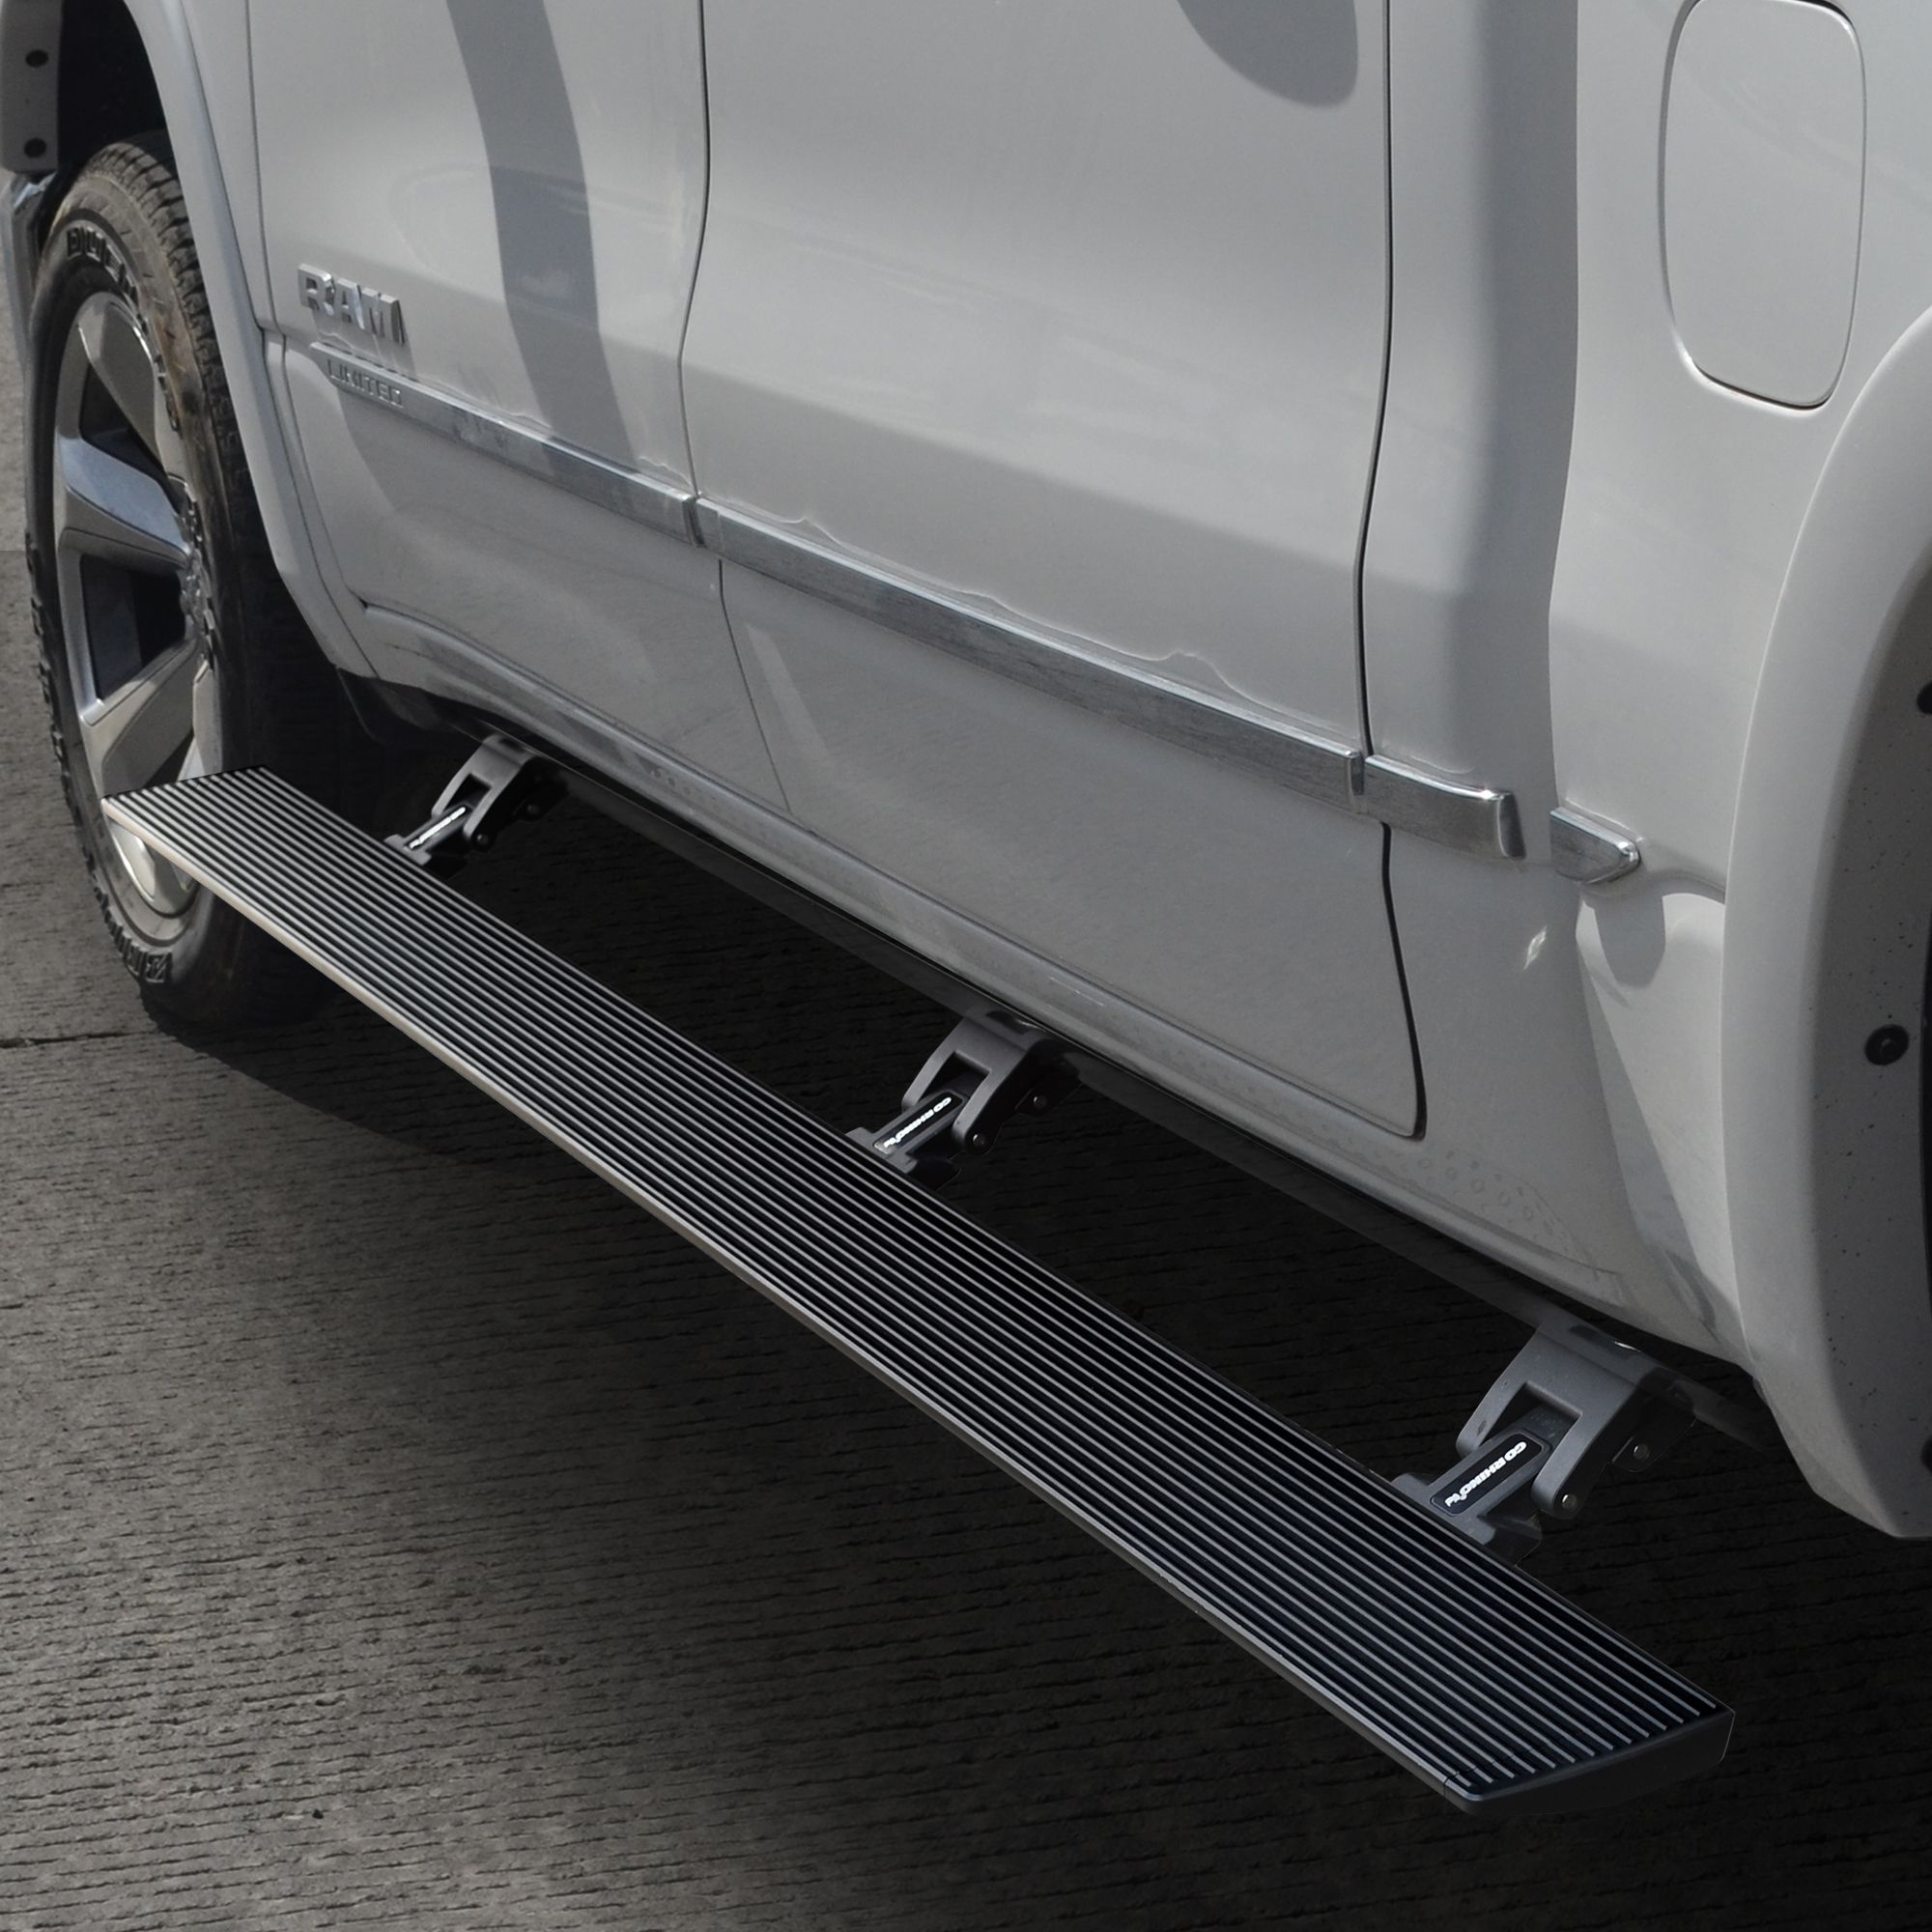 Go Rhino 20430680PC - E1 Electric Running Boards With Mounting Brackets - Textured Black